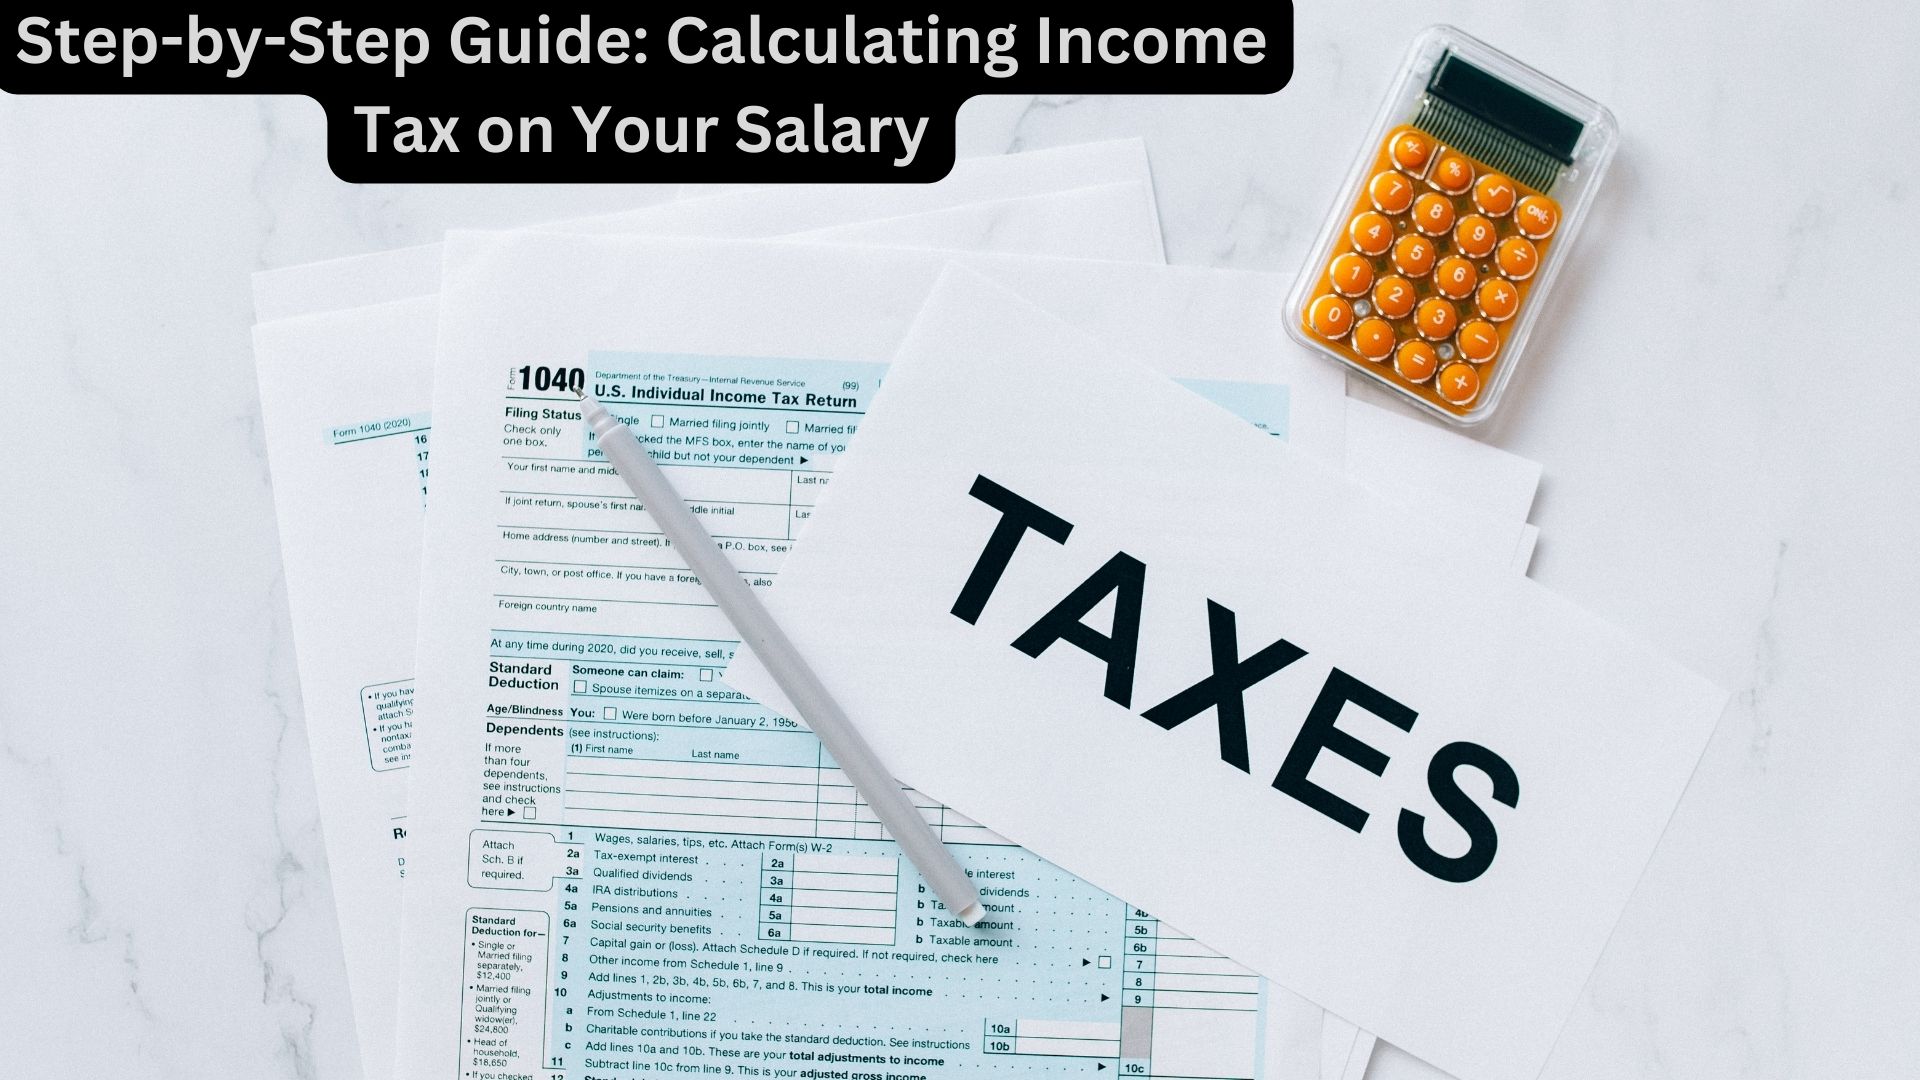 Step-by-Step Guide: Calculating Income Tax on Your Salary